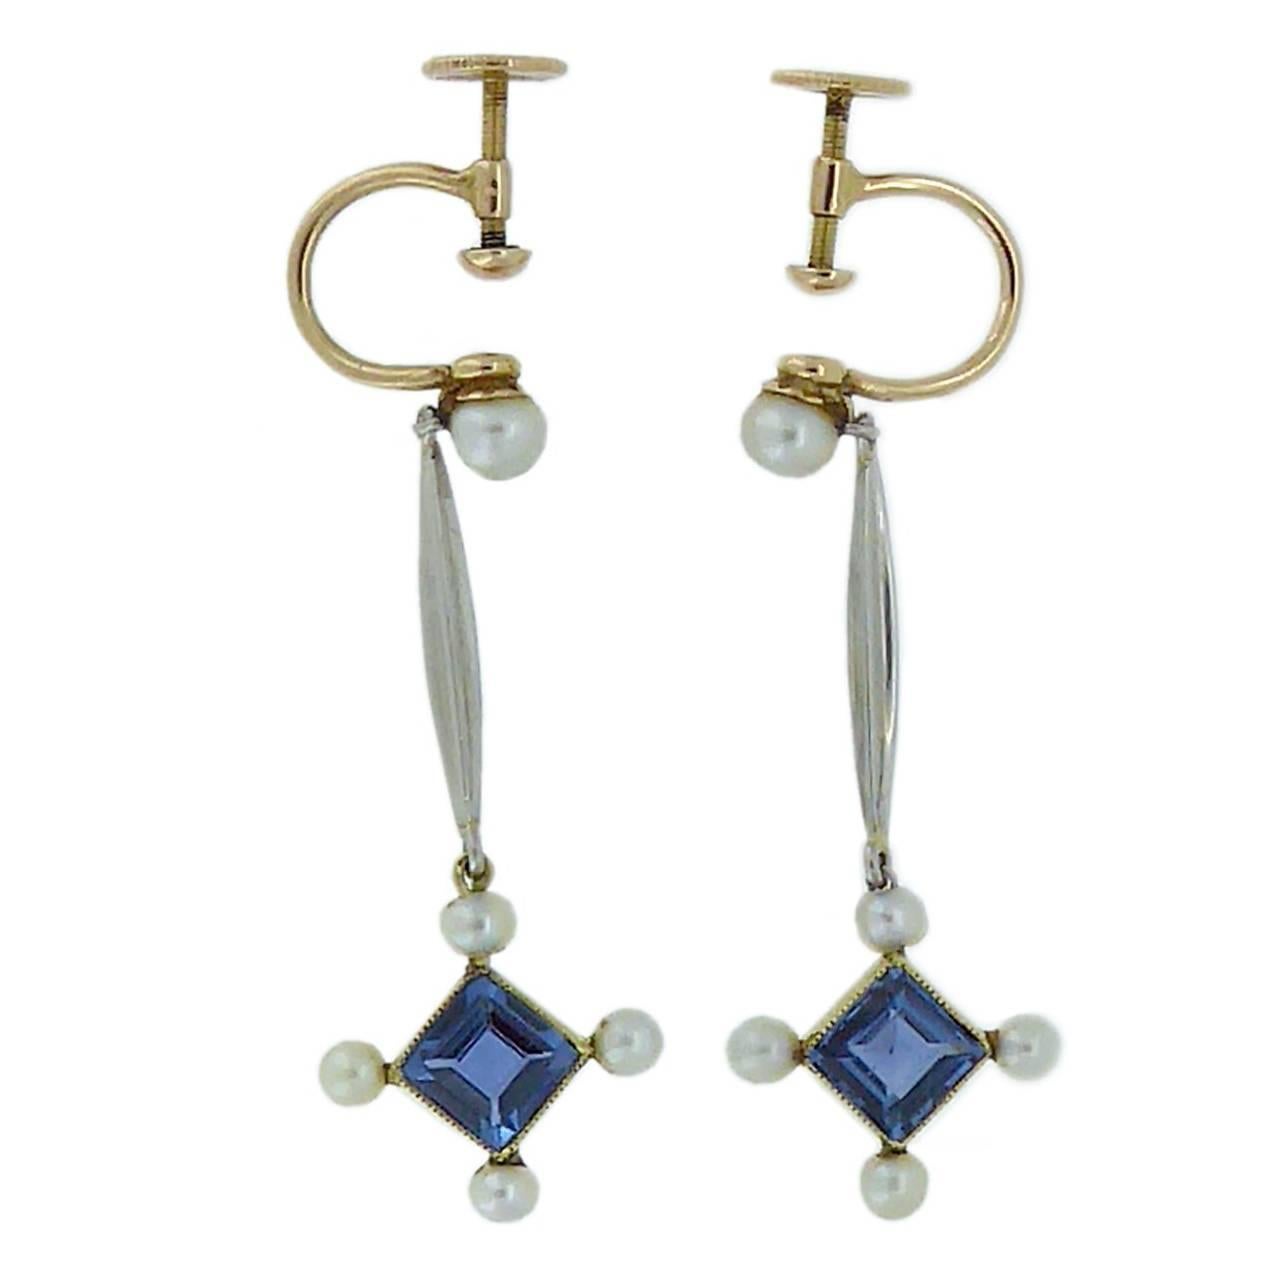 Edwardian Drop Earrings with Sapphire and Seed Pearl